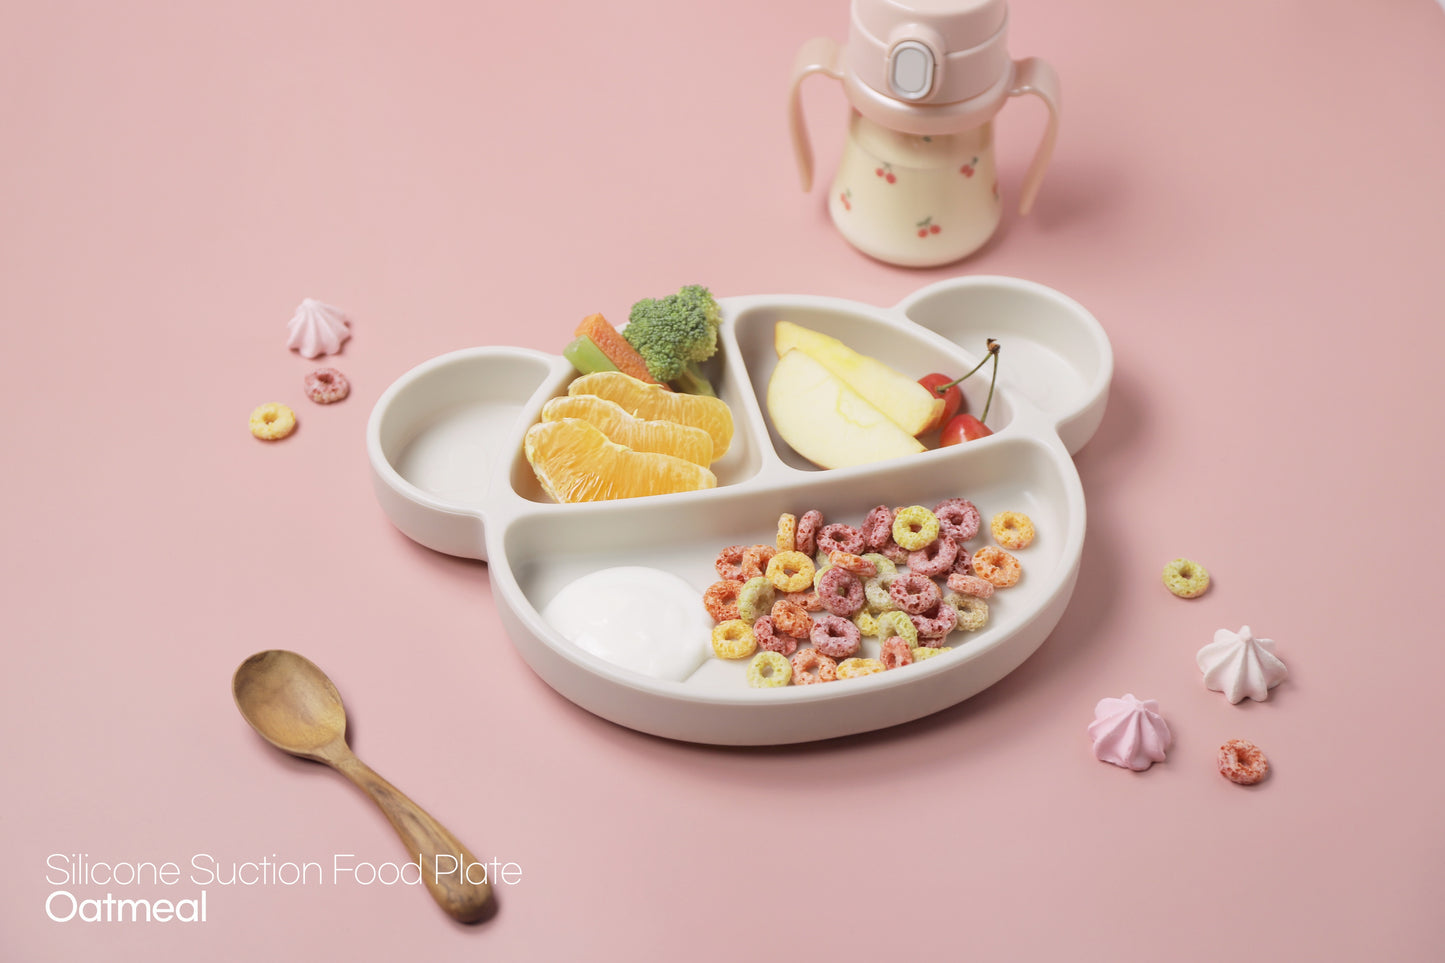 Silcone Suction Food Plate